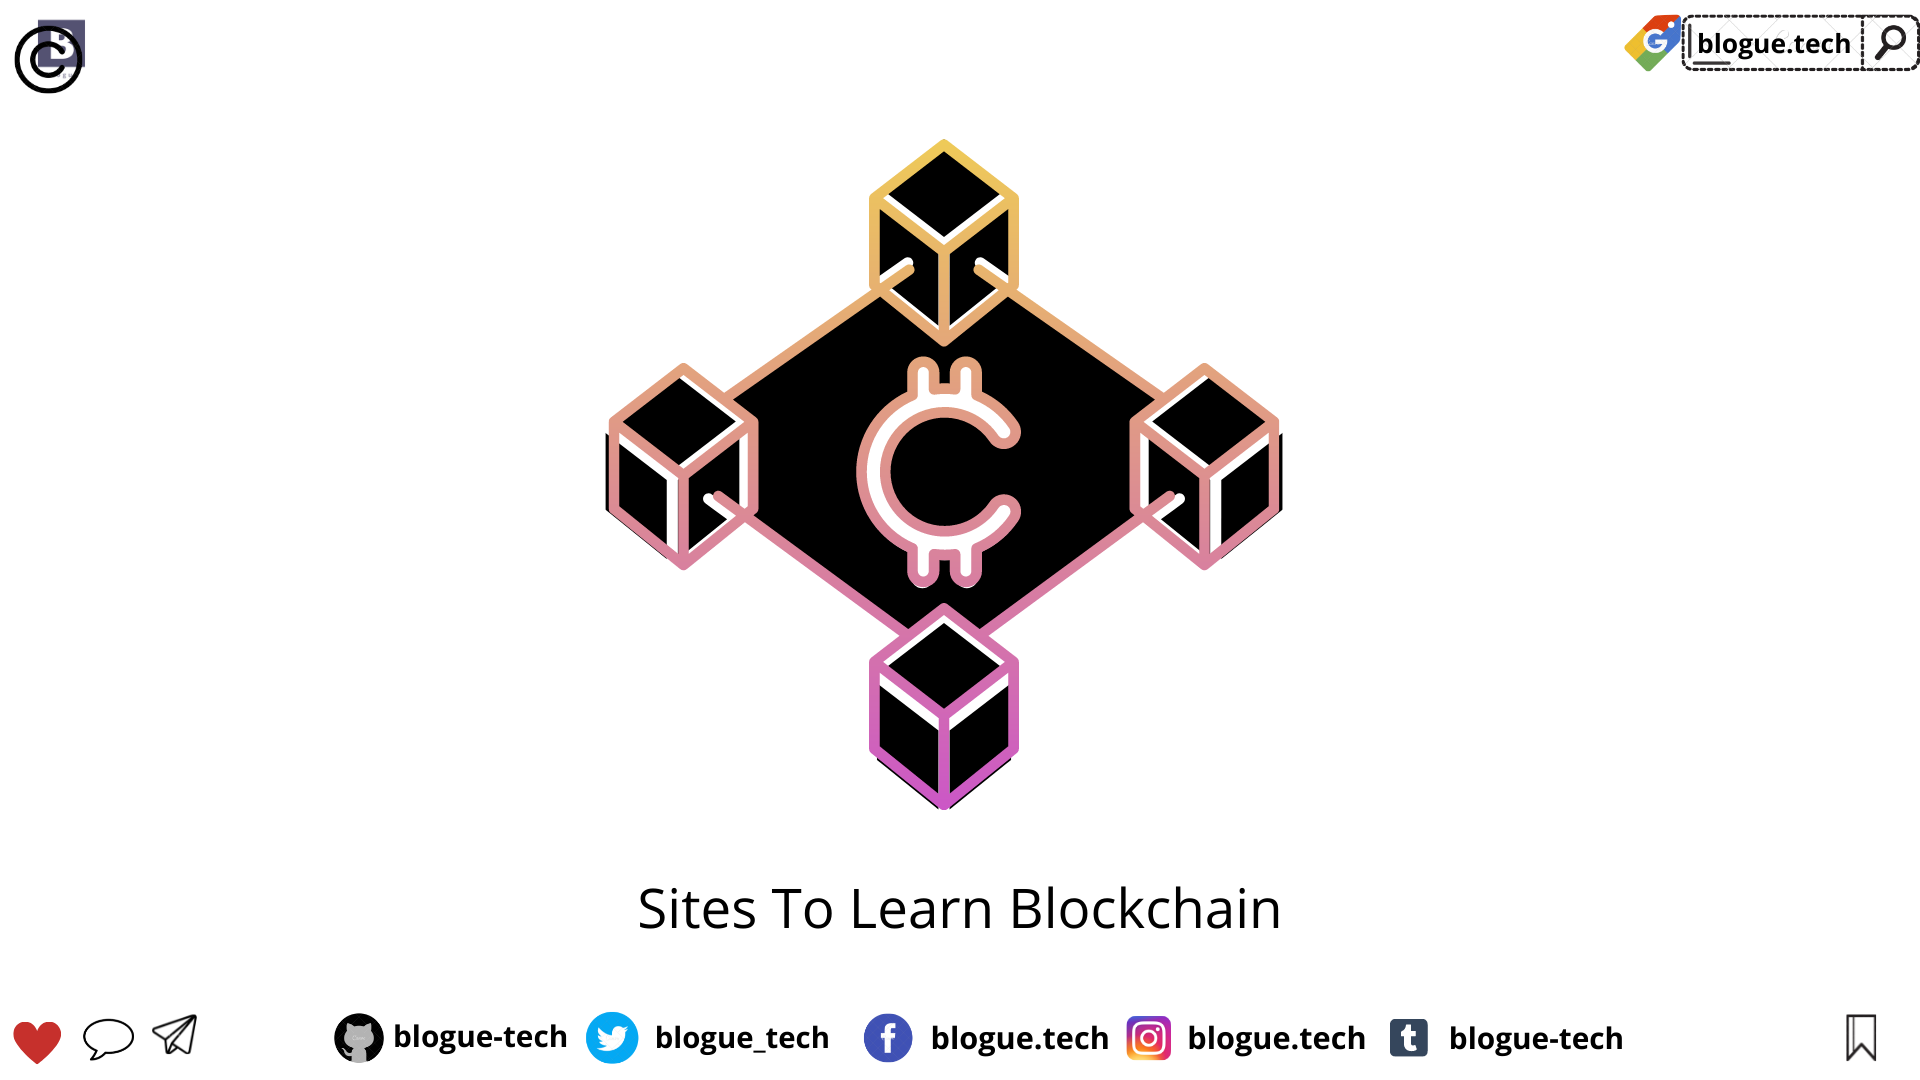 Sites To Learn Blockchain